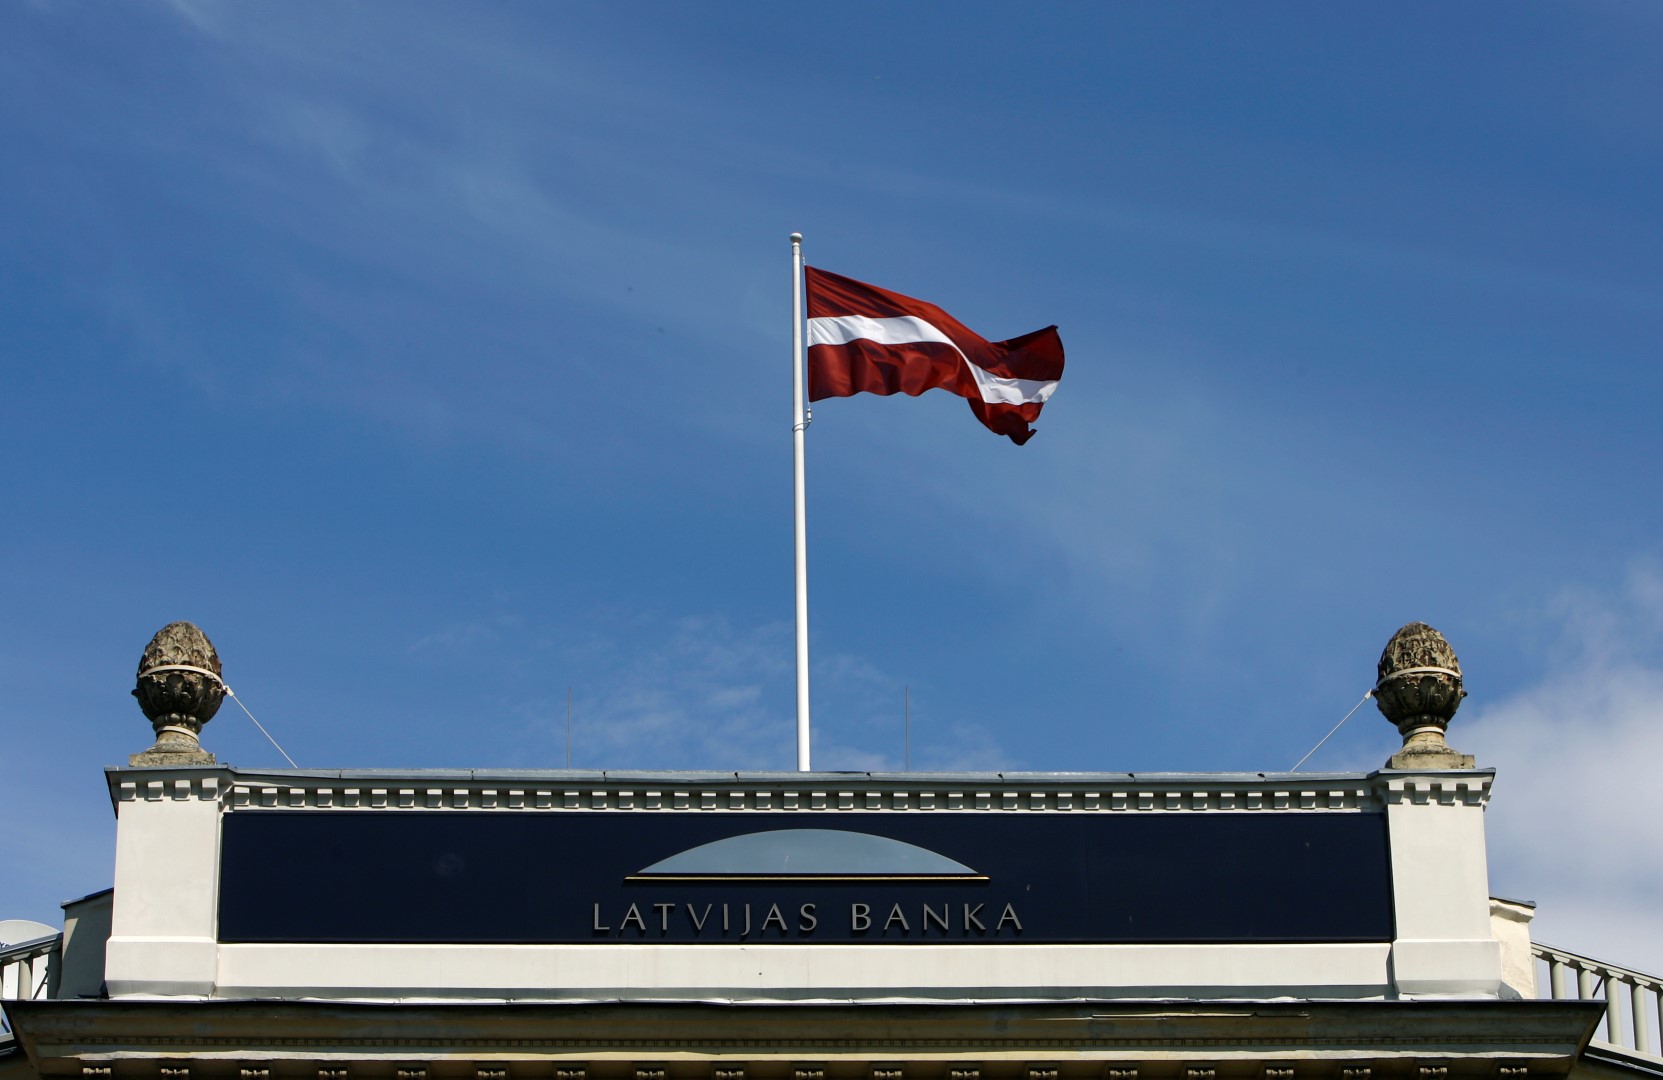 Latvia's flag waves over the Central Bank's main office building in Riga May 13, 2009. Latvia's central bank said on Wednesday it had revised its economic growth forecast to -16.5 percent from the previous forecast of -12.0 percent, and it had cut its refinancing rate to 4 percent from 5 percent. REUTERS/Ints Kalnins (LATVIA SOCIETY POLITICS BUSINESS) - GM1E55D1MDH01